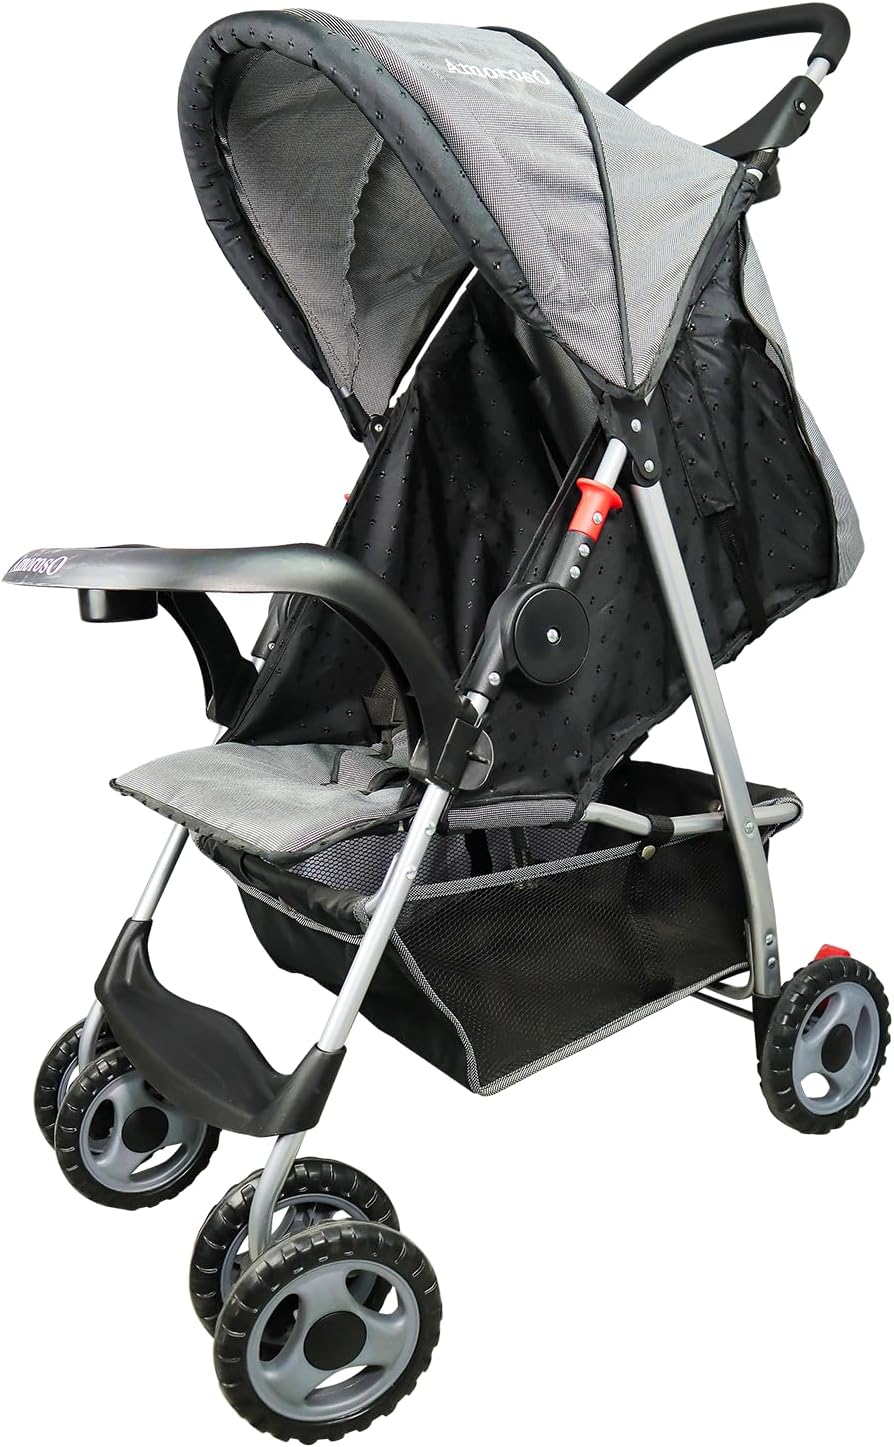 AmorosO Single Stroller - Baby Stroller with Four Wheels - Lightweight Baby Pink Stroller - Convertible Stroller with Extra Storage Space - Foldable Stroller with Sun Protection Hood Cover - AmorosO Single Stroller Review